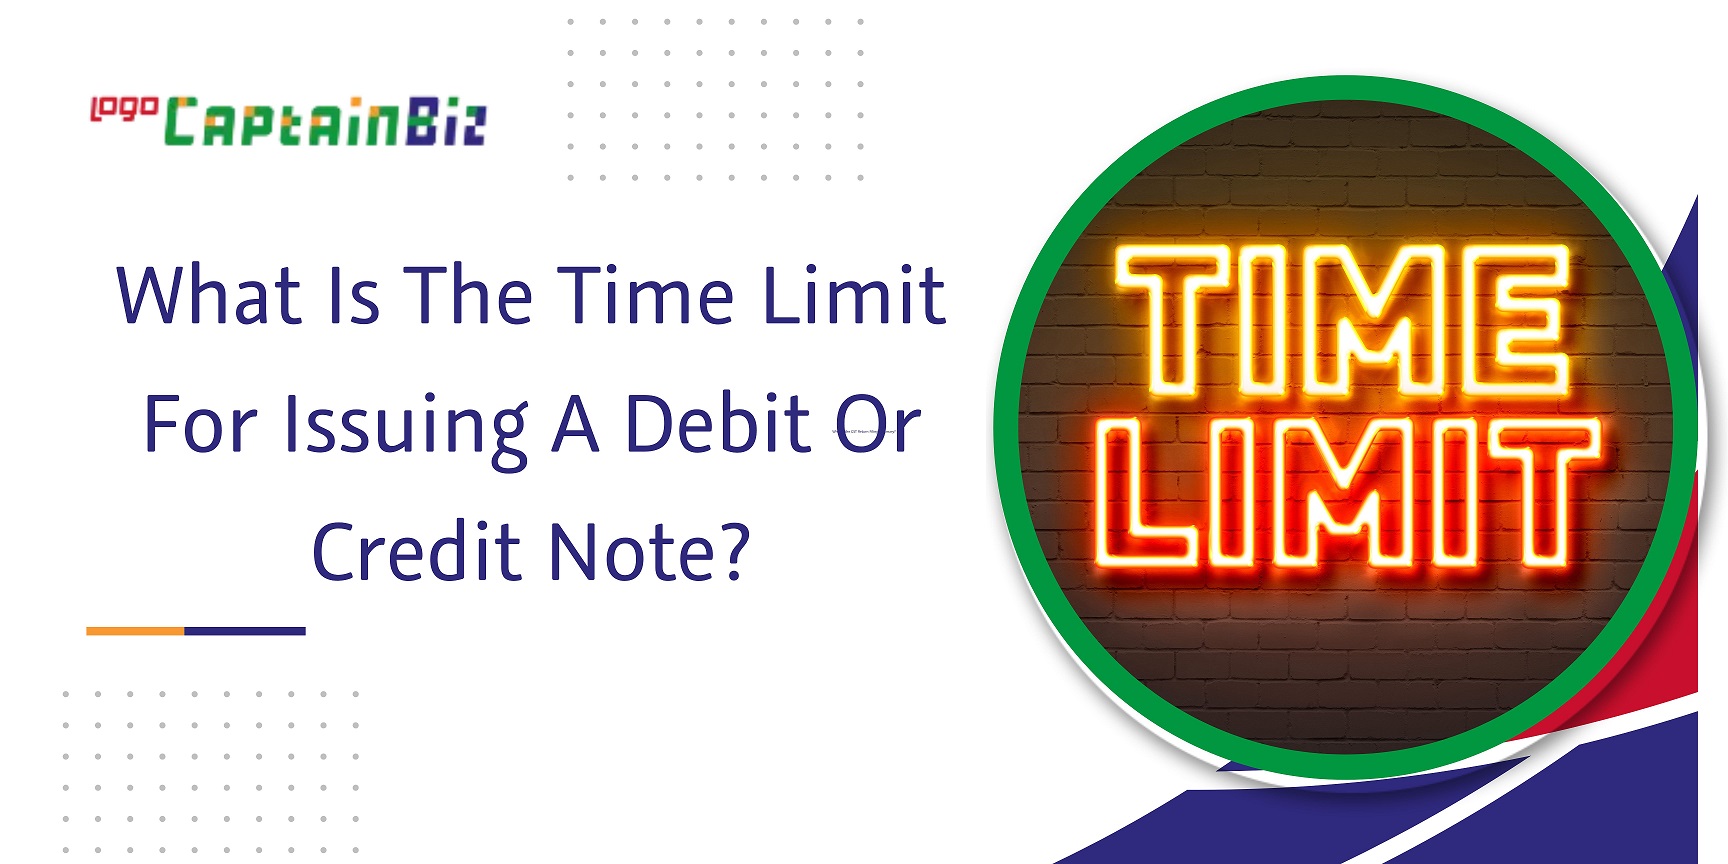 CaptainBiz: what is the time limit for issuing a debit or credit note